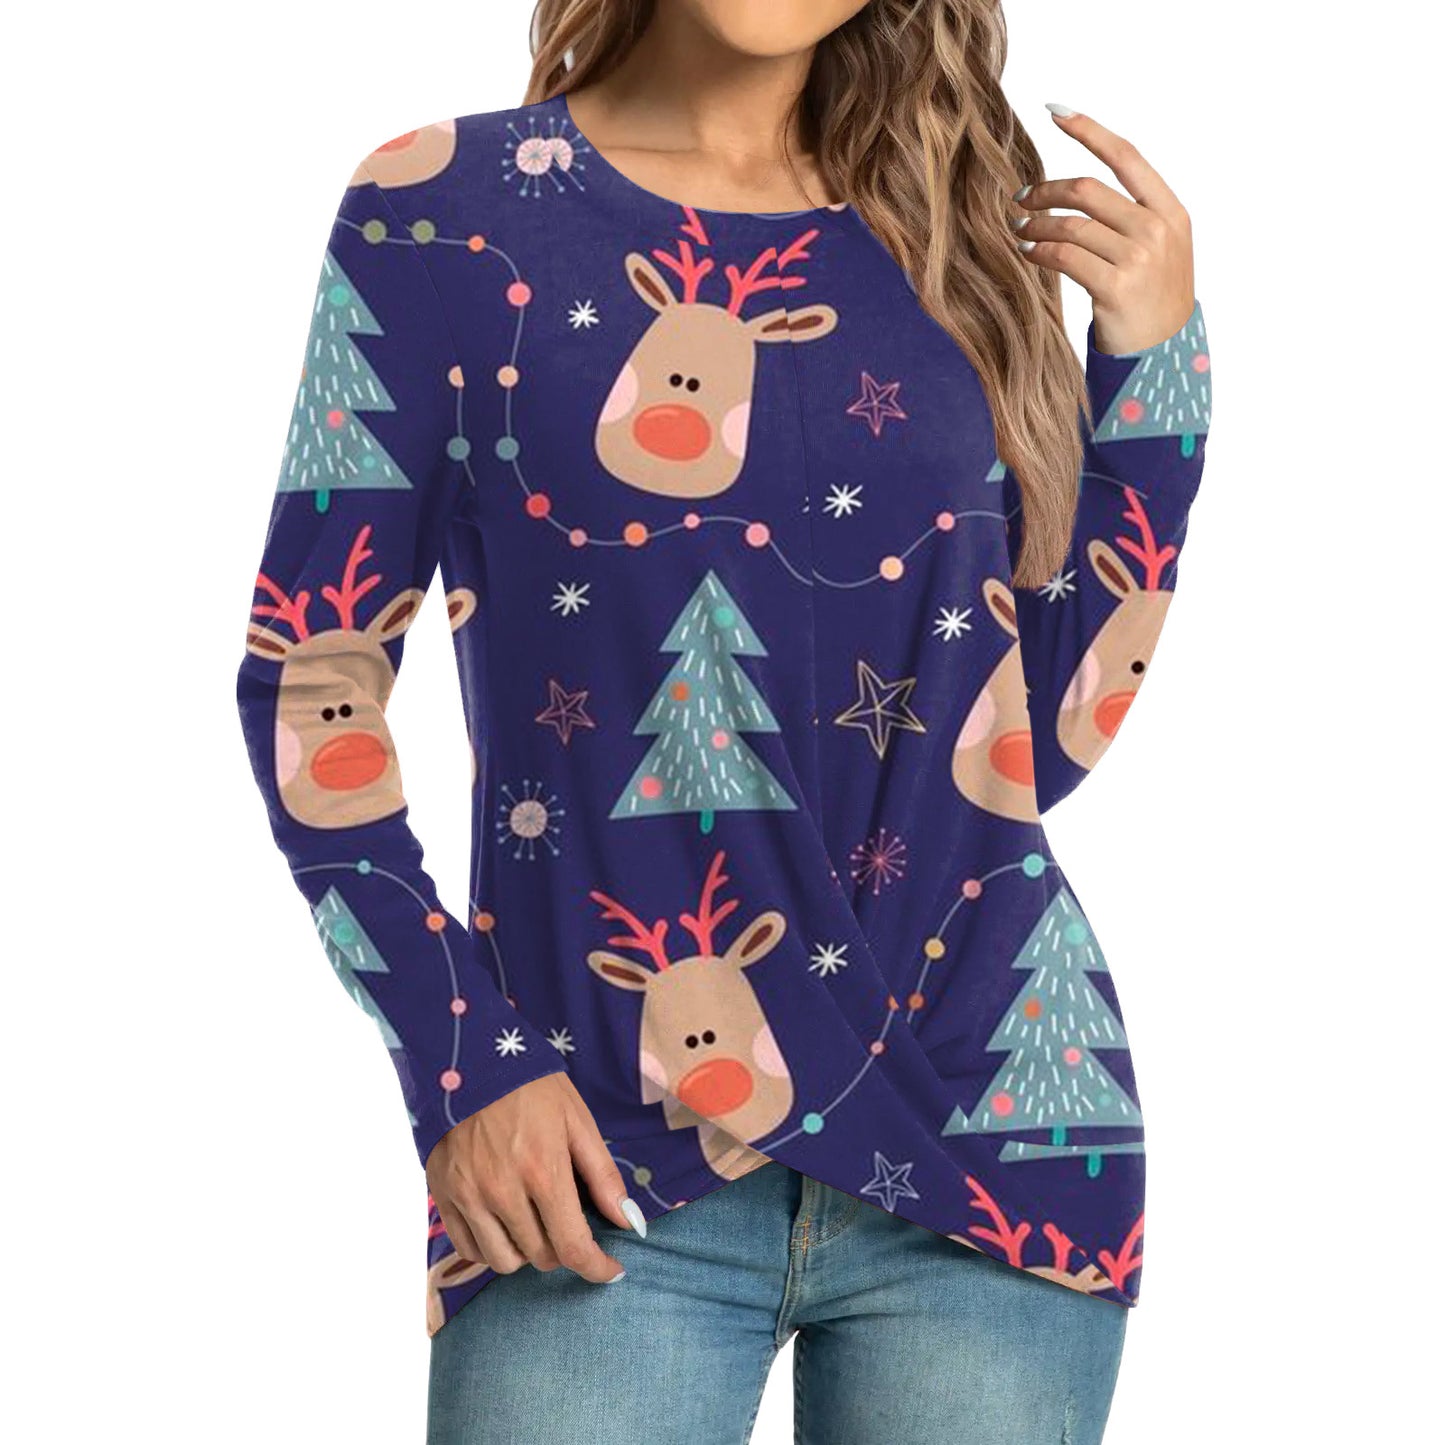 Women's Fashion Casual Christmas Element Printing Round Neck Long Sleeve Top